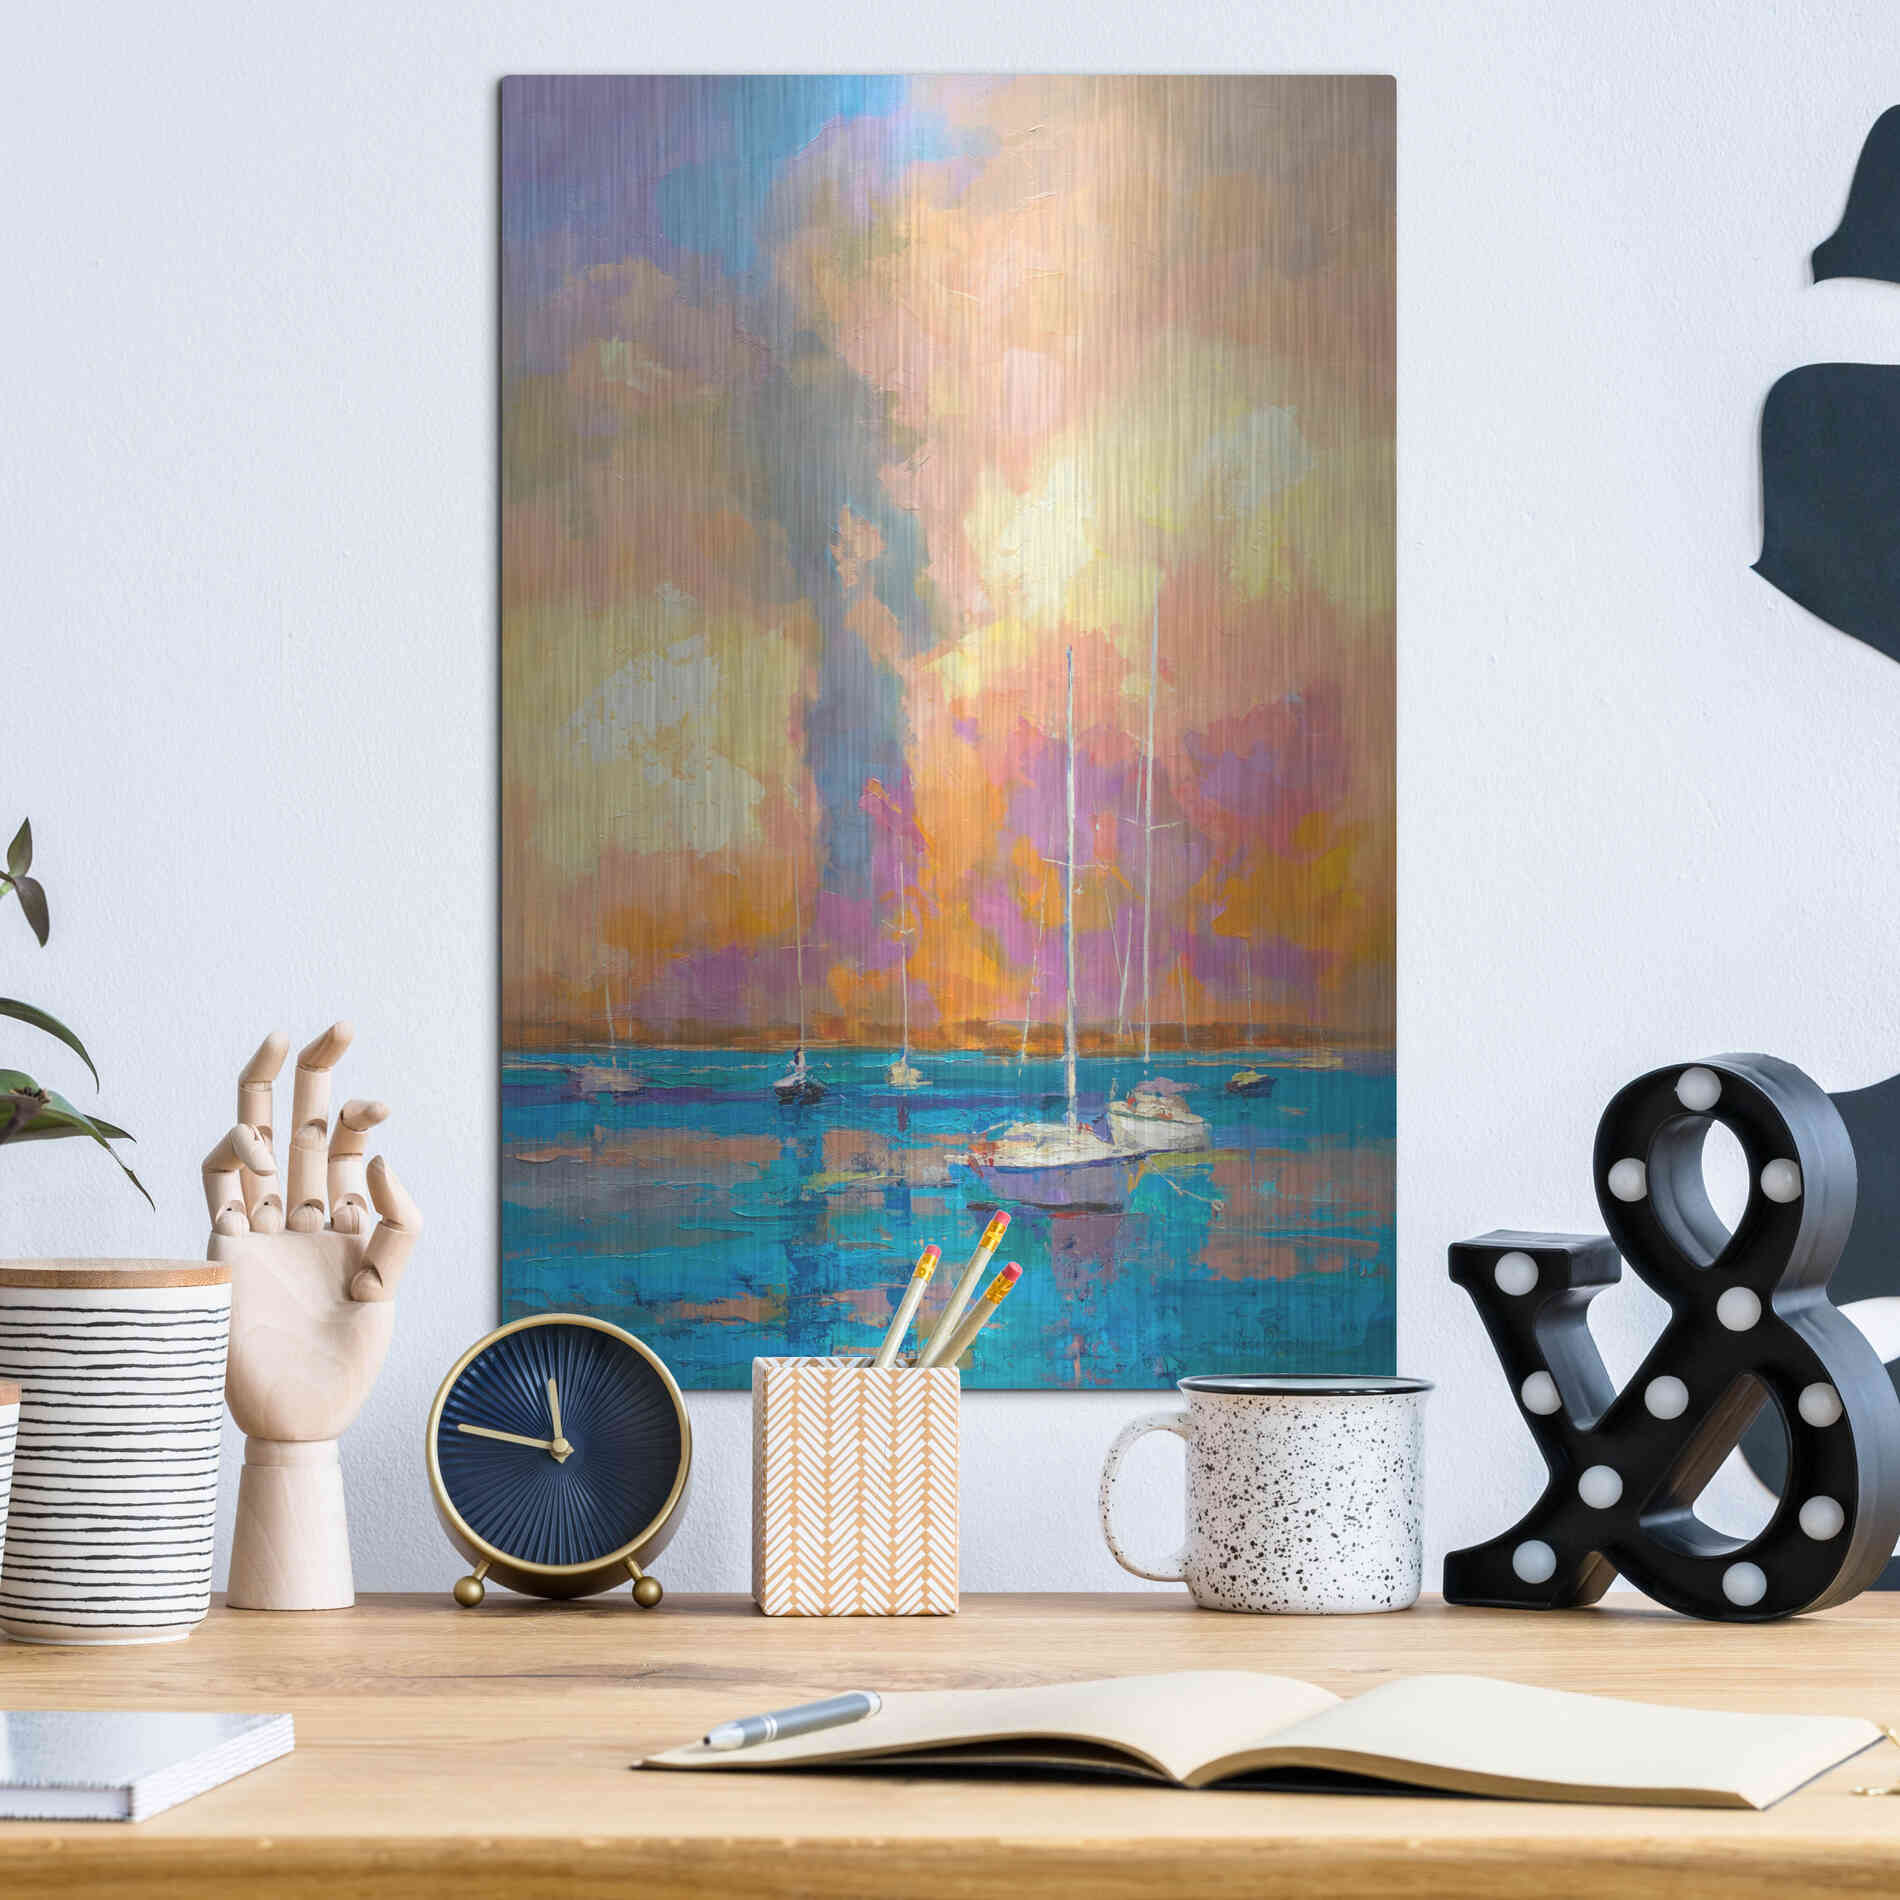 Luxe Metal Art 'Evening On The Bay' by Kasia Bruniany Metal Wall Art,12x16